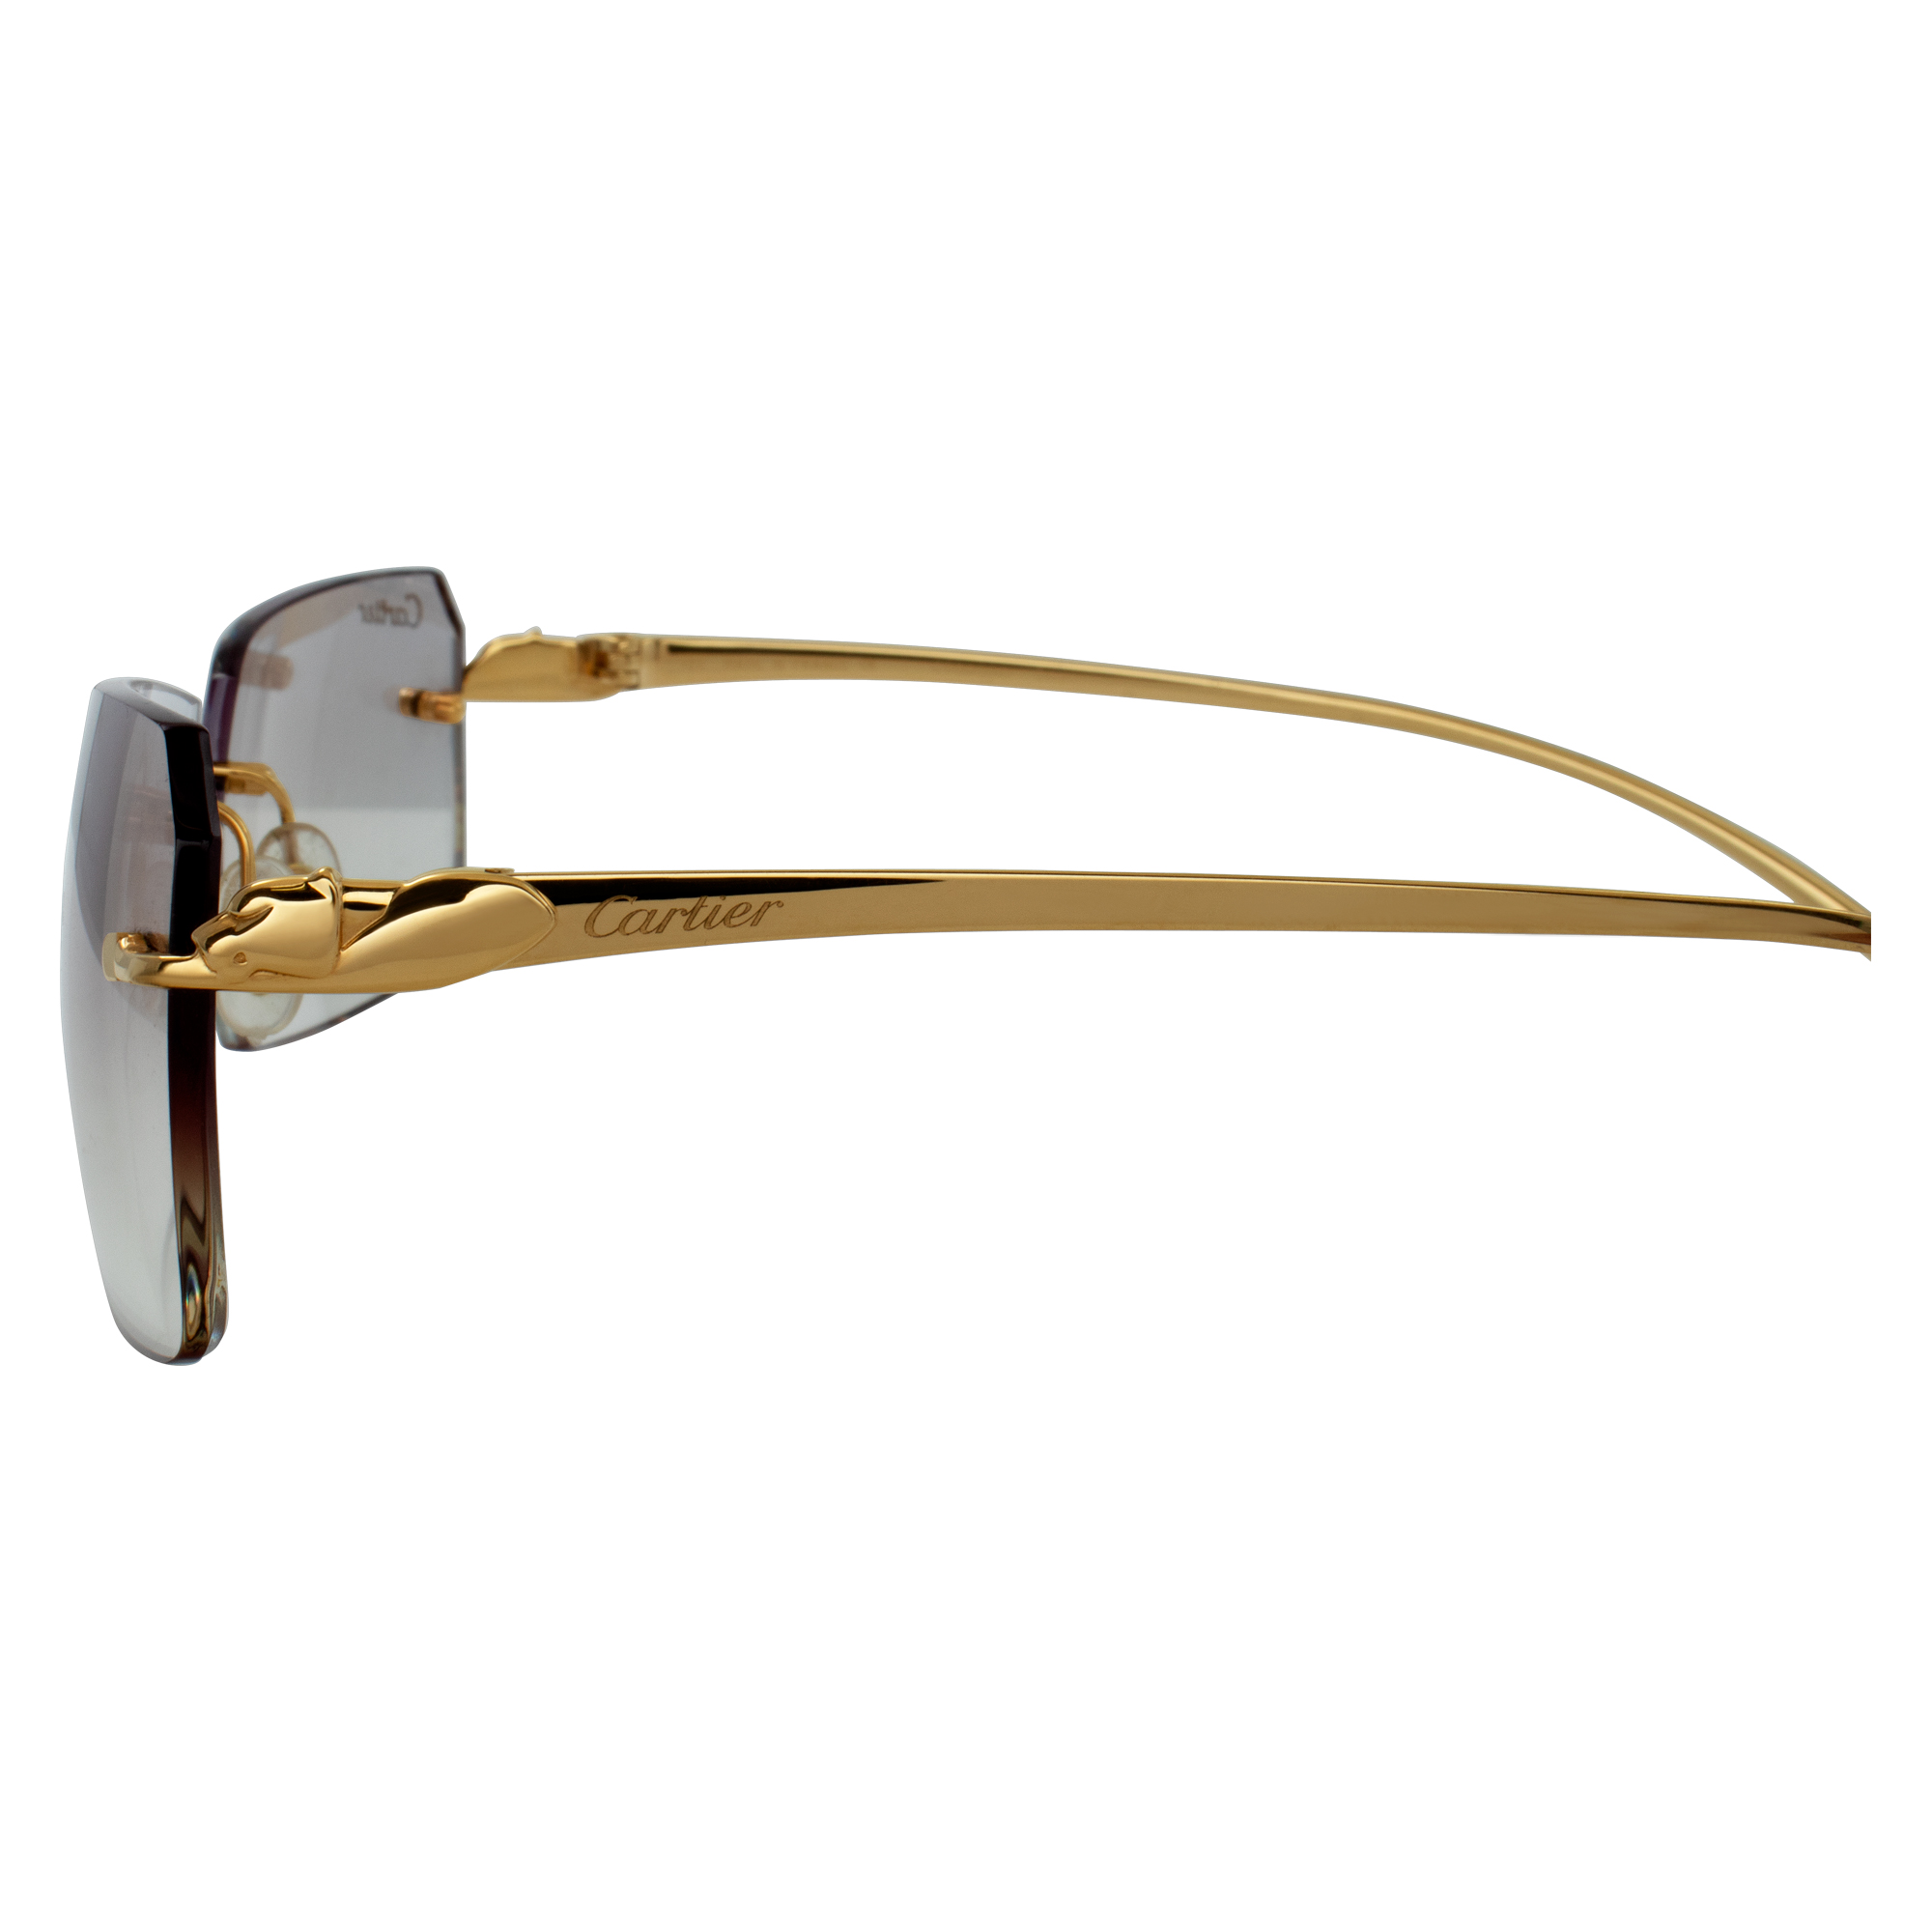 Cartier Panthere Sunglasses image 4